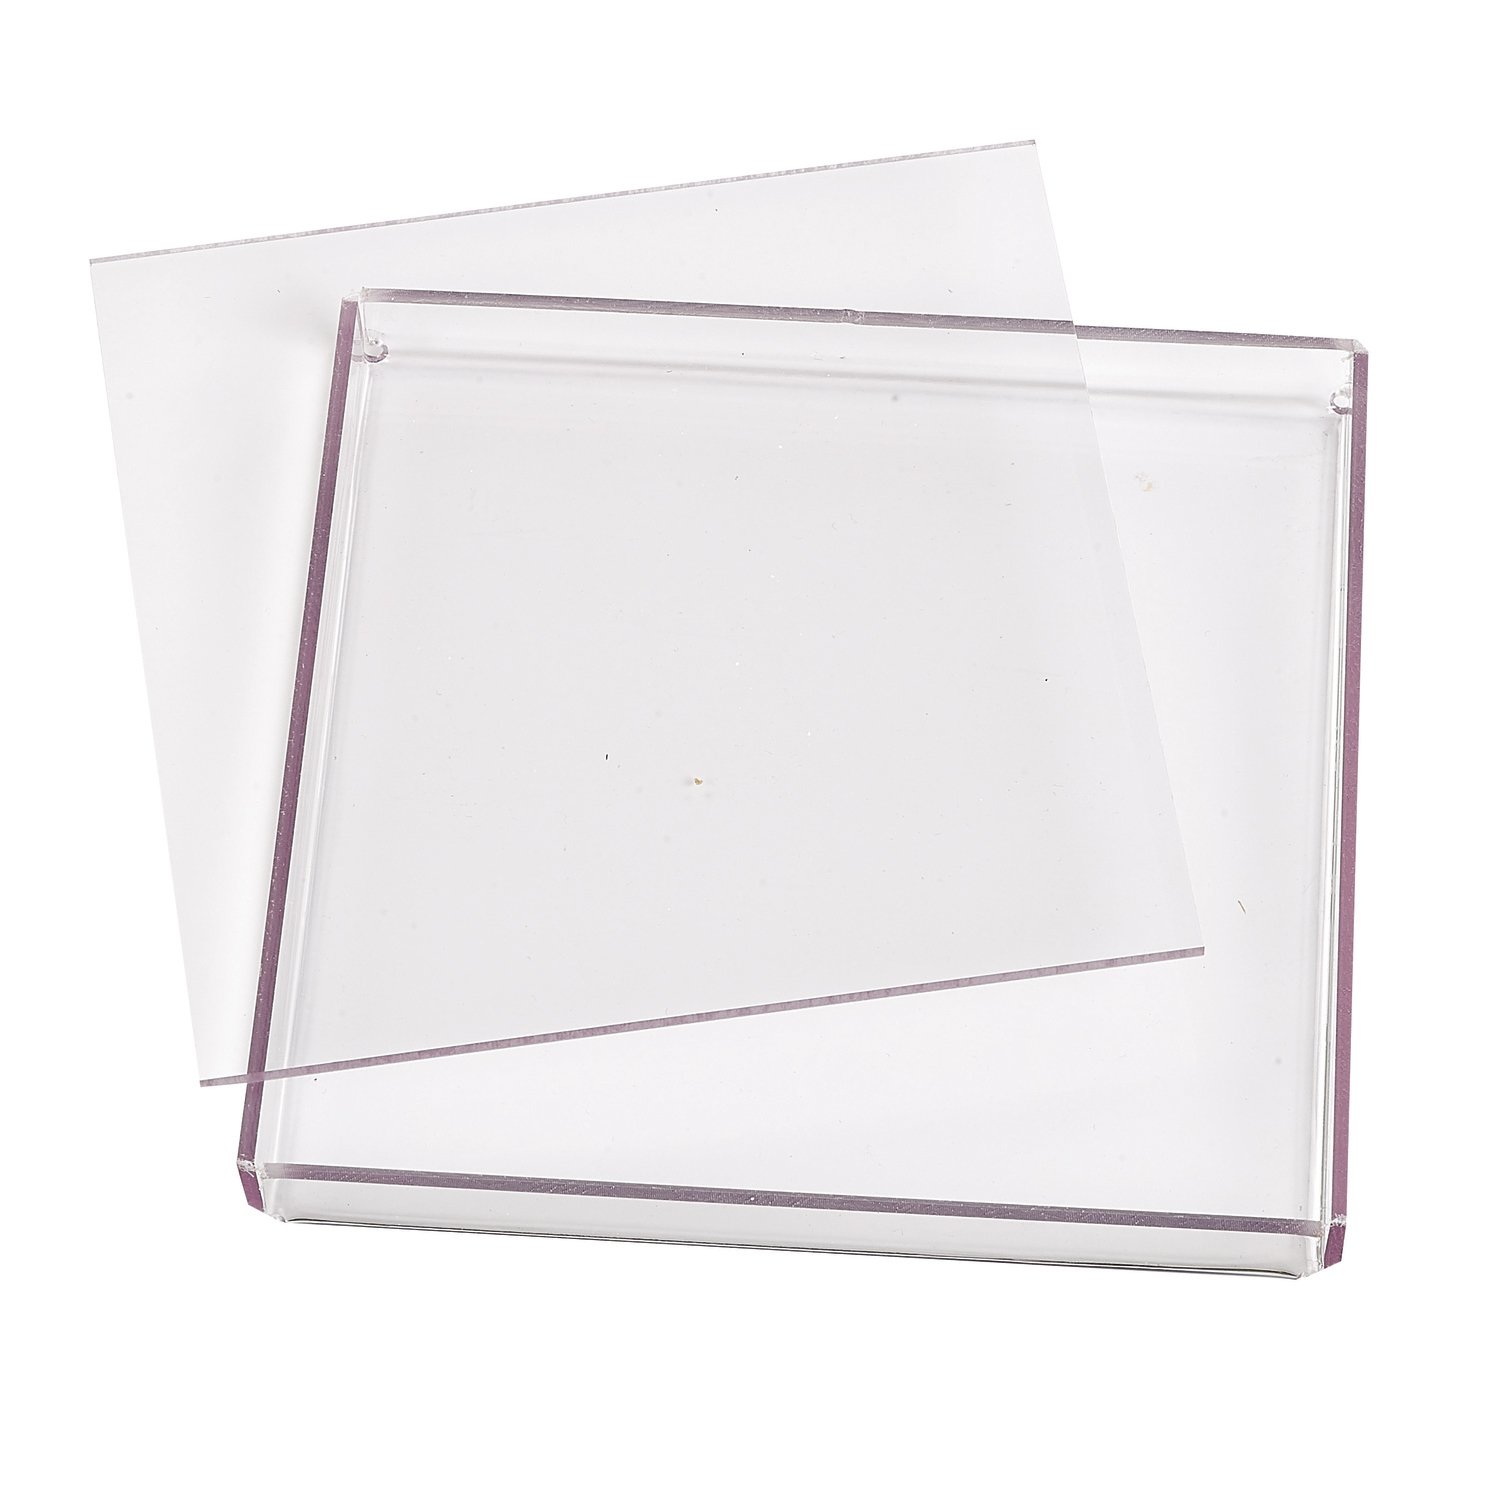 Clear perspex 17 x 17cm tray and 16.5 x 16.5cm divider - 10sets